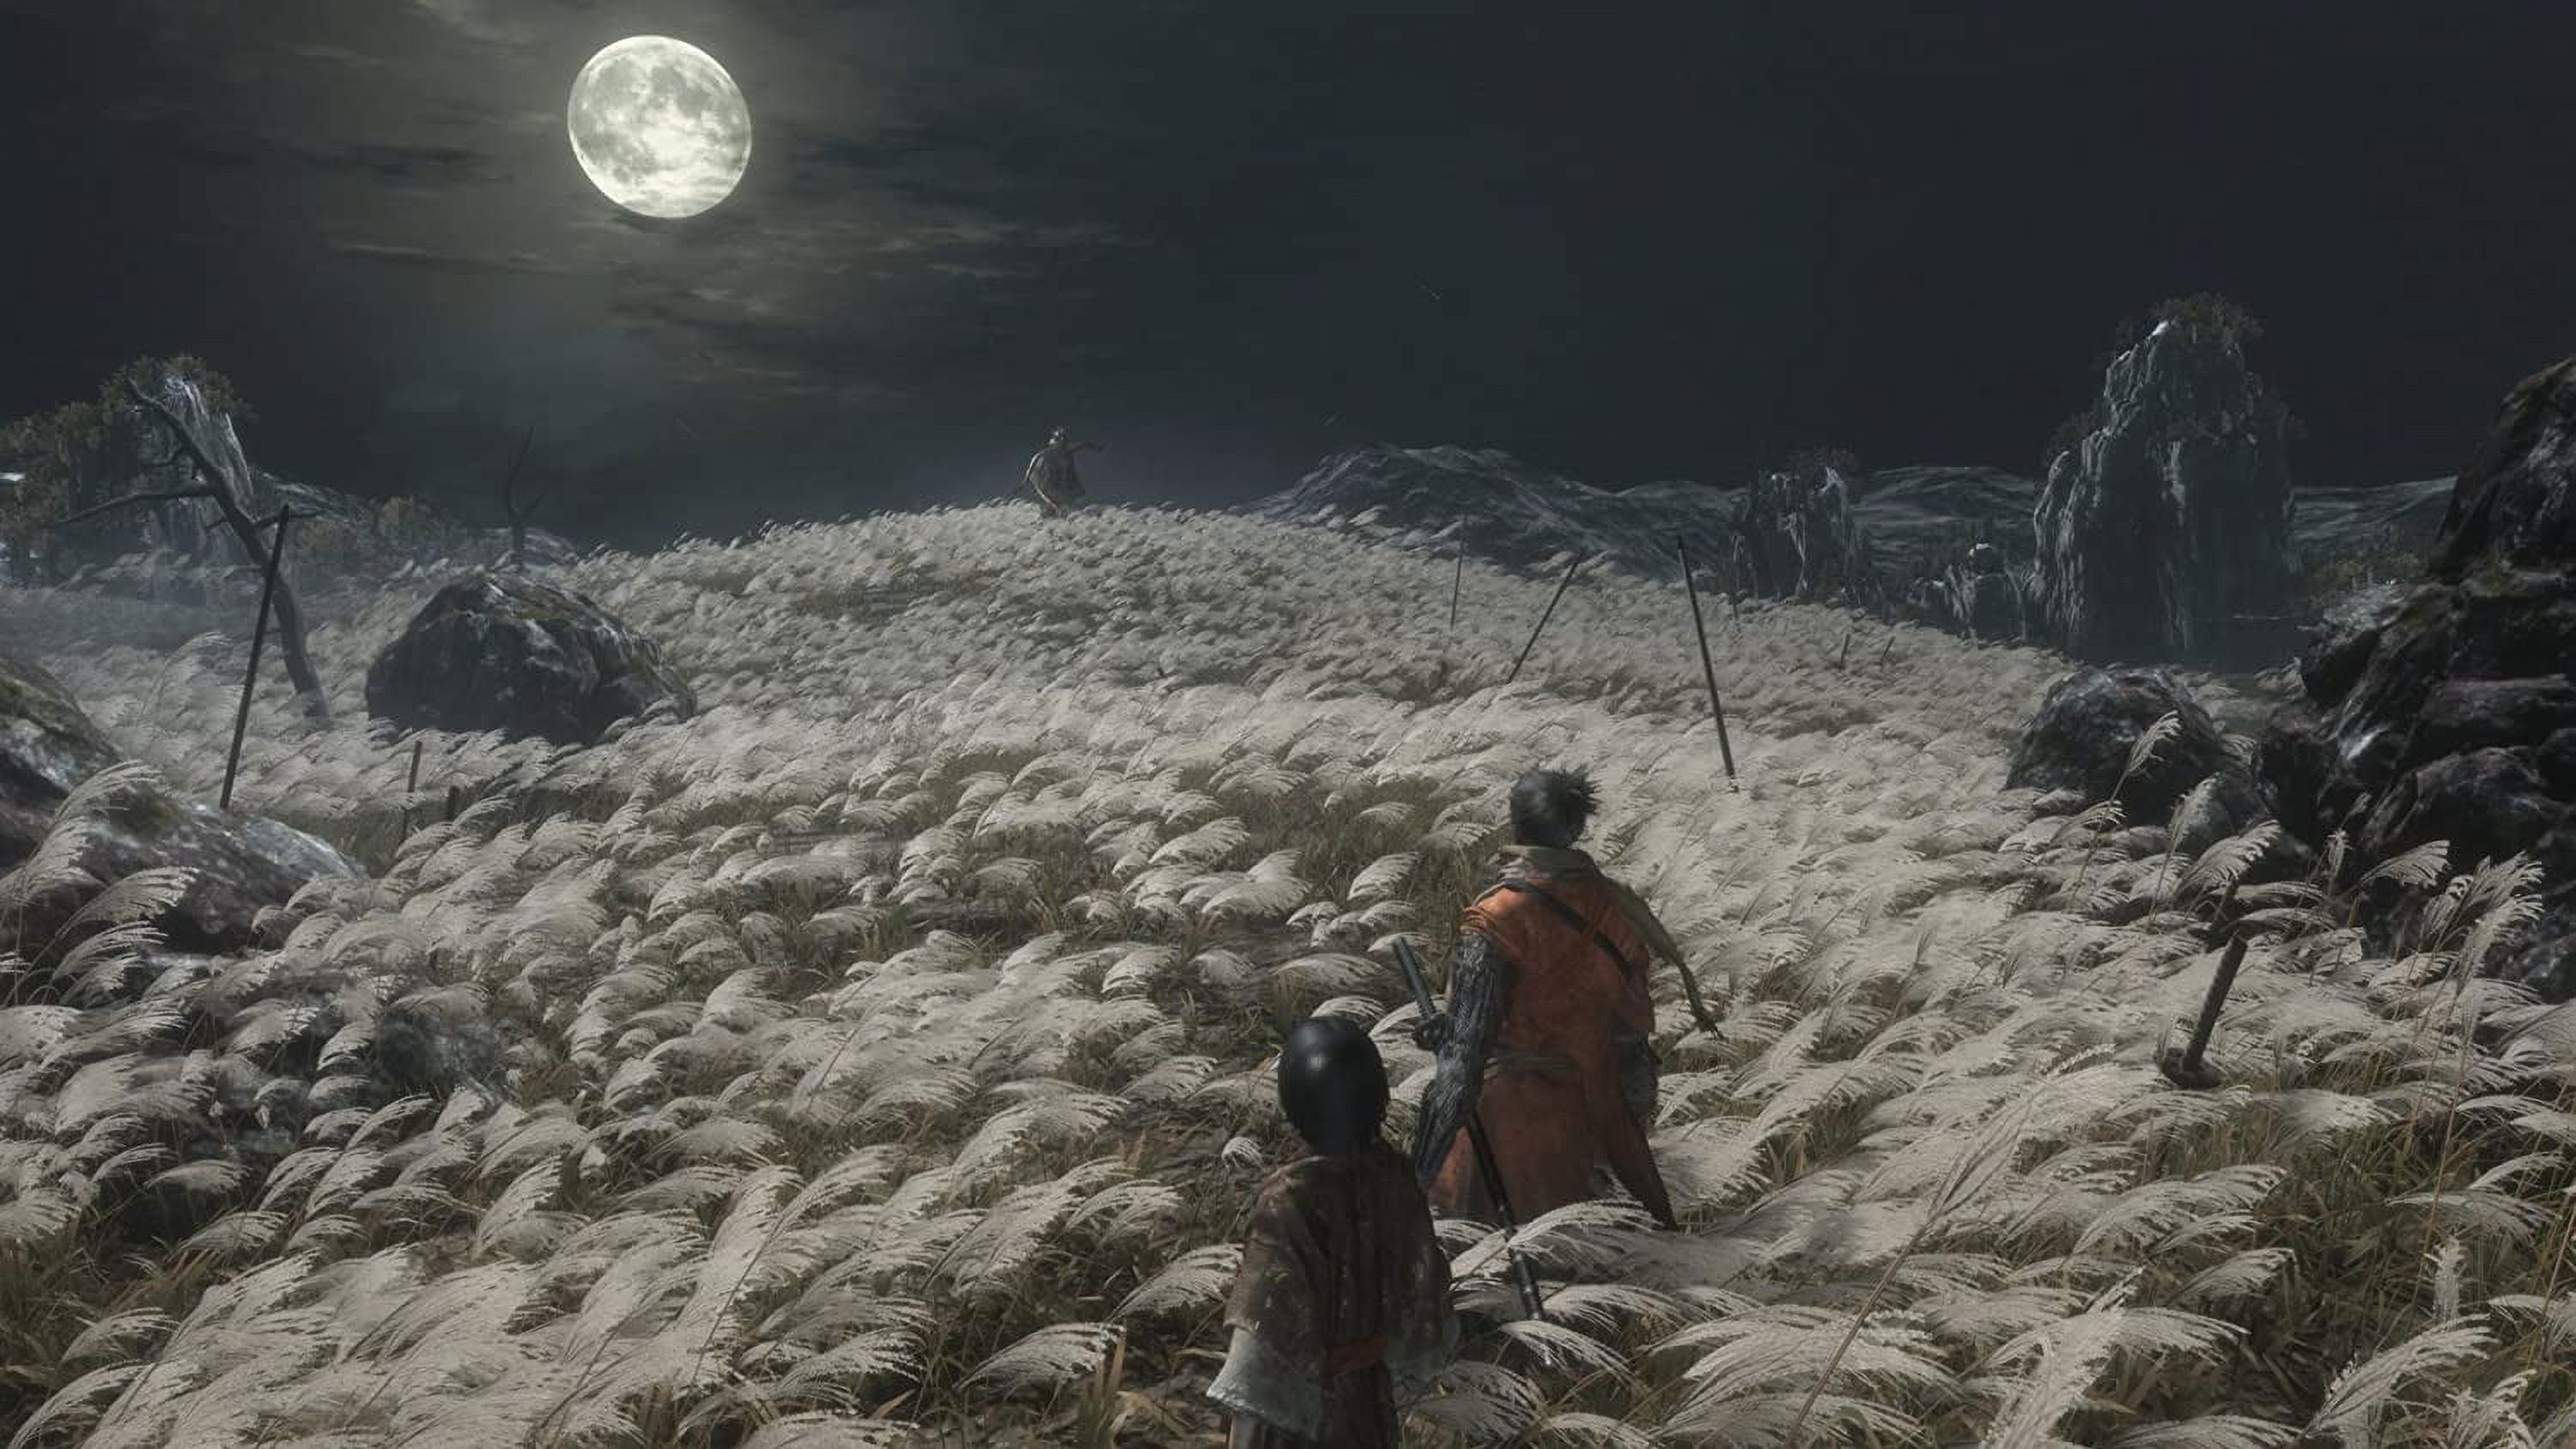 Sekiro: Shadows Die Twice, Activision, PlayStation 4, 047875882928 - image 4 of 5